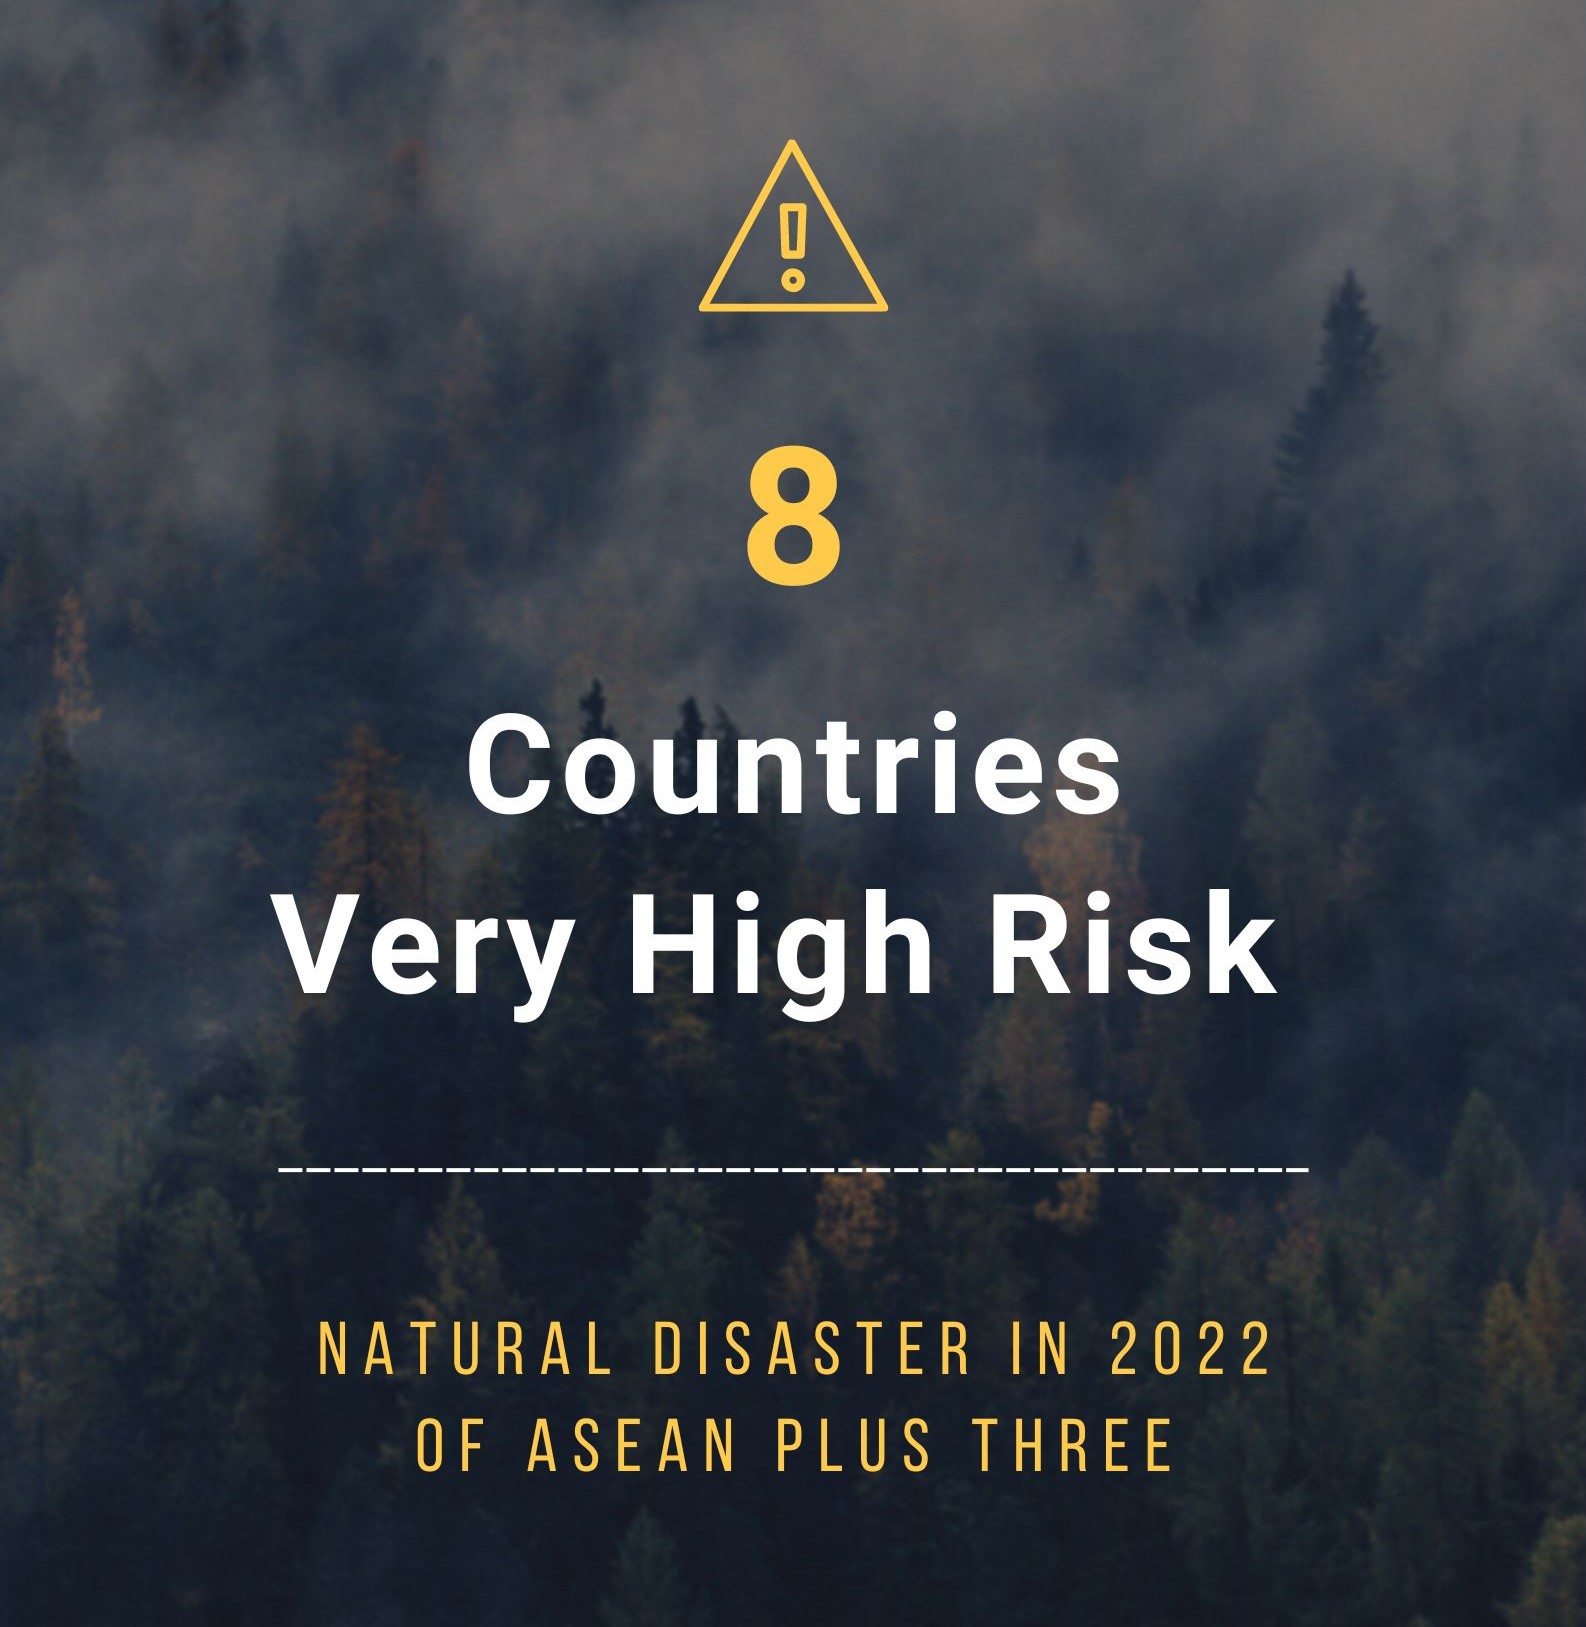 With experiencing catastrophic calamities in 2022, the ASEAN Plus Three continually boost enormous efforts to enhance disaster resilience for 2023.  